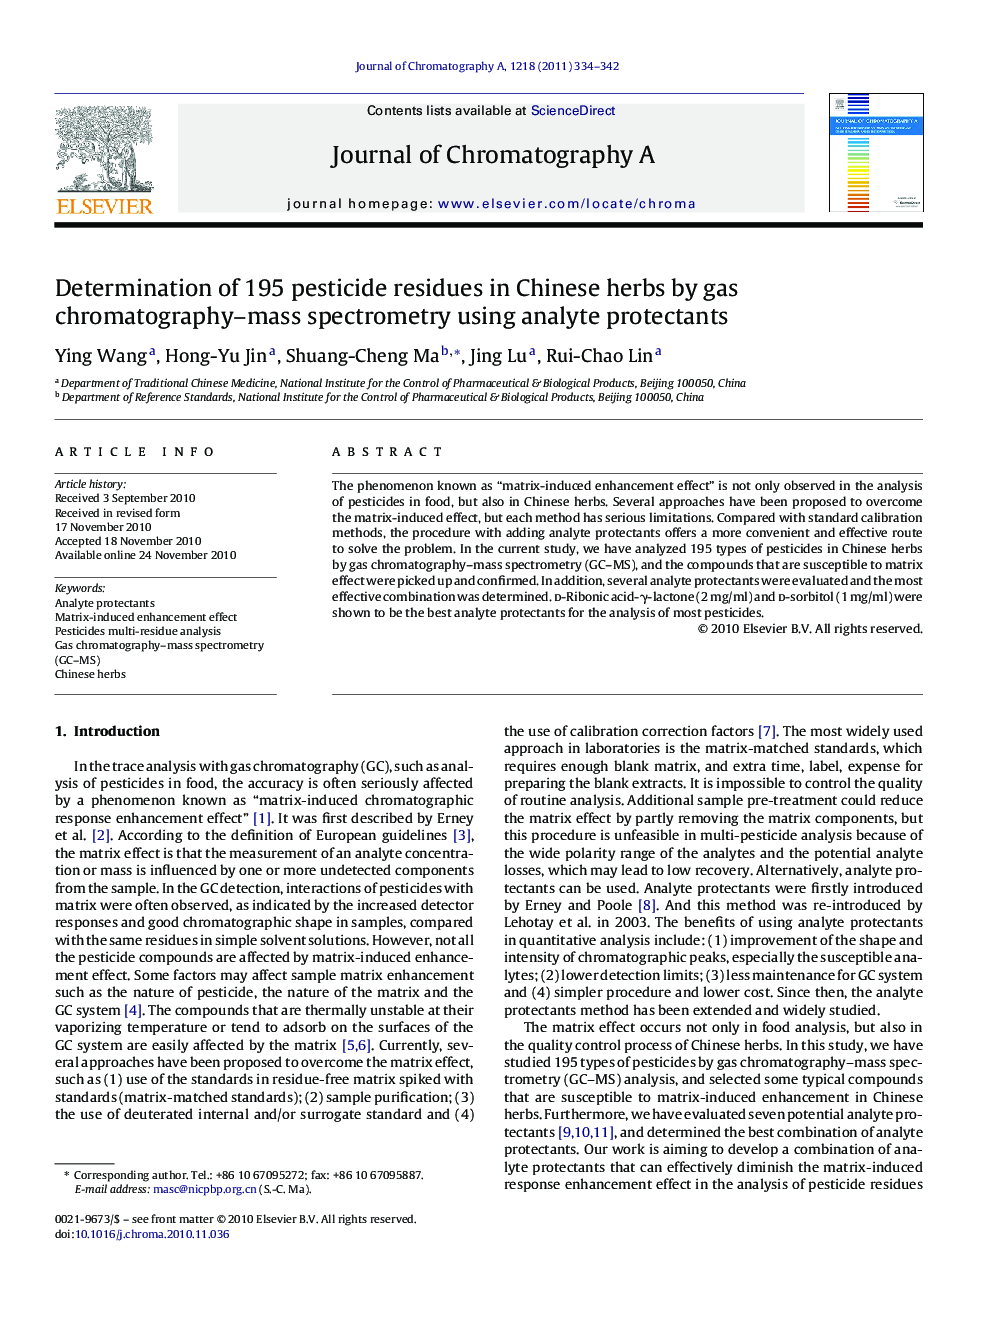 Determination of 195 pesticide residues in Chinese herbs by gas chromatography–mass spectrometry using analyte protectants